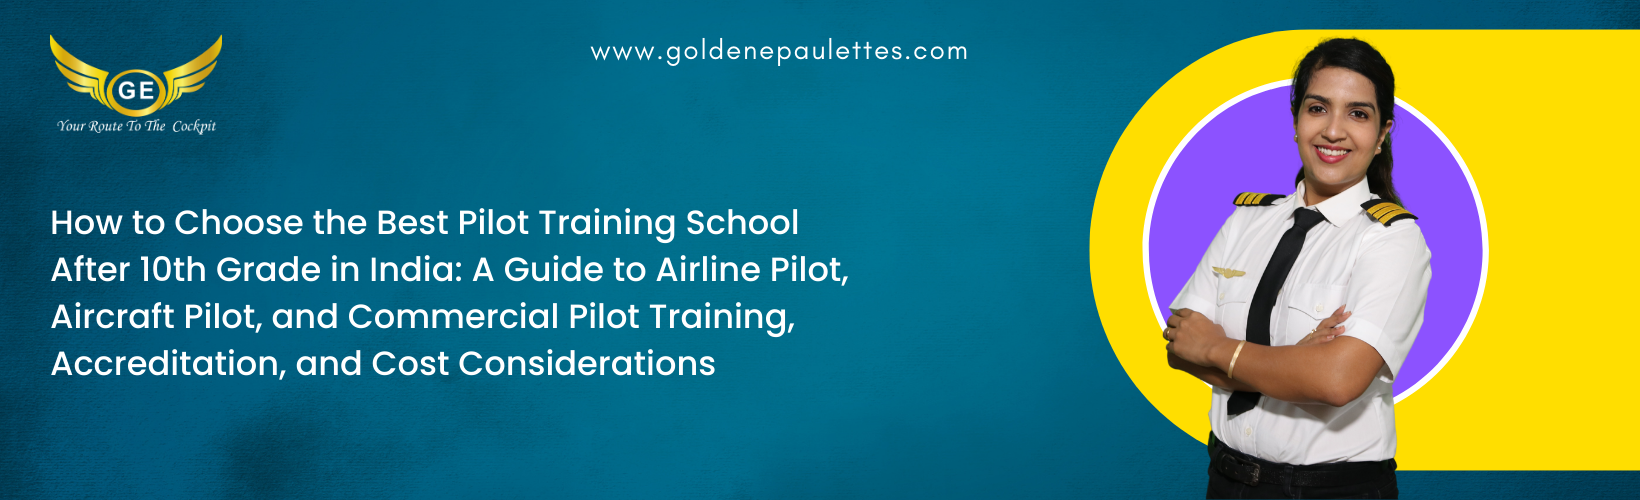 How to Choose the Best Pilot Training School After 10th Grade in India